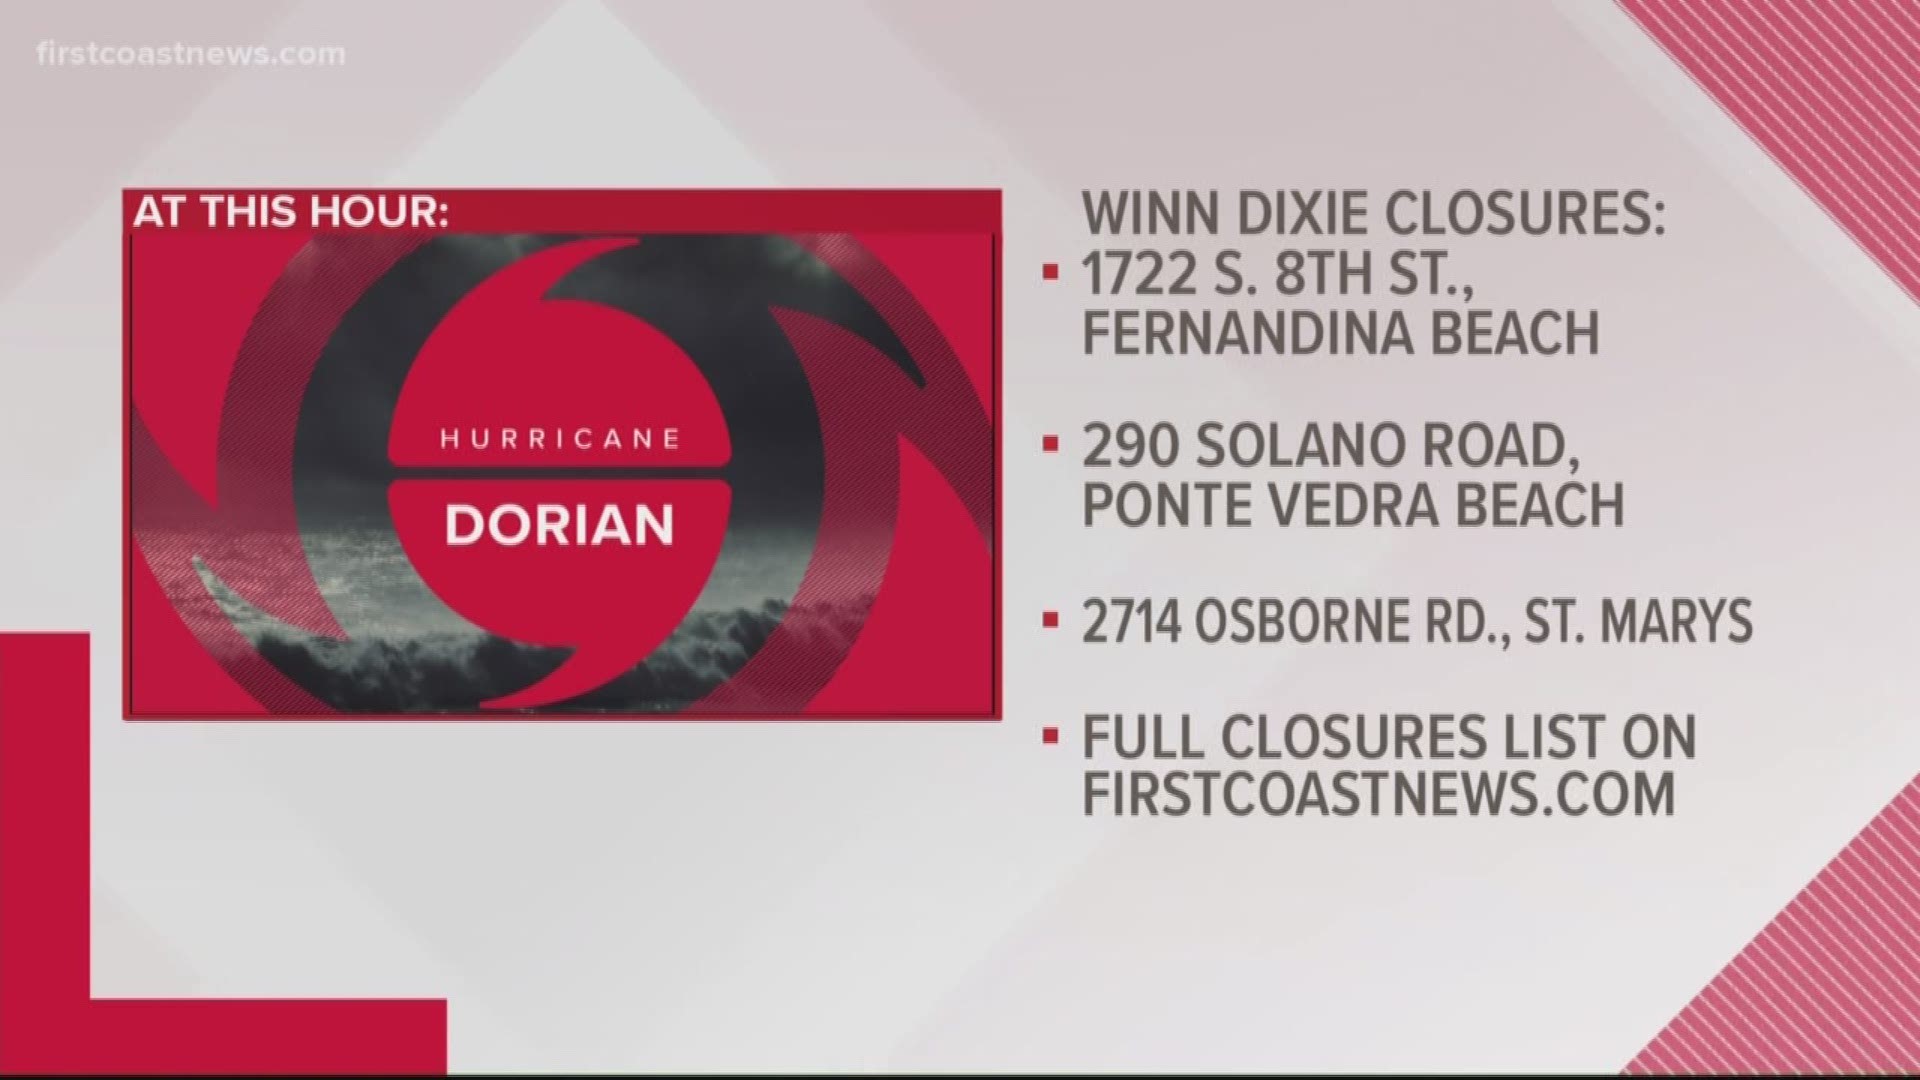 Tell us what stores, restaurants, or even kids activities are open ahead of Hurricane Dorian by using #OpenNowFCN